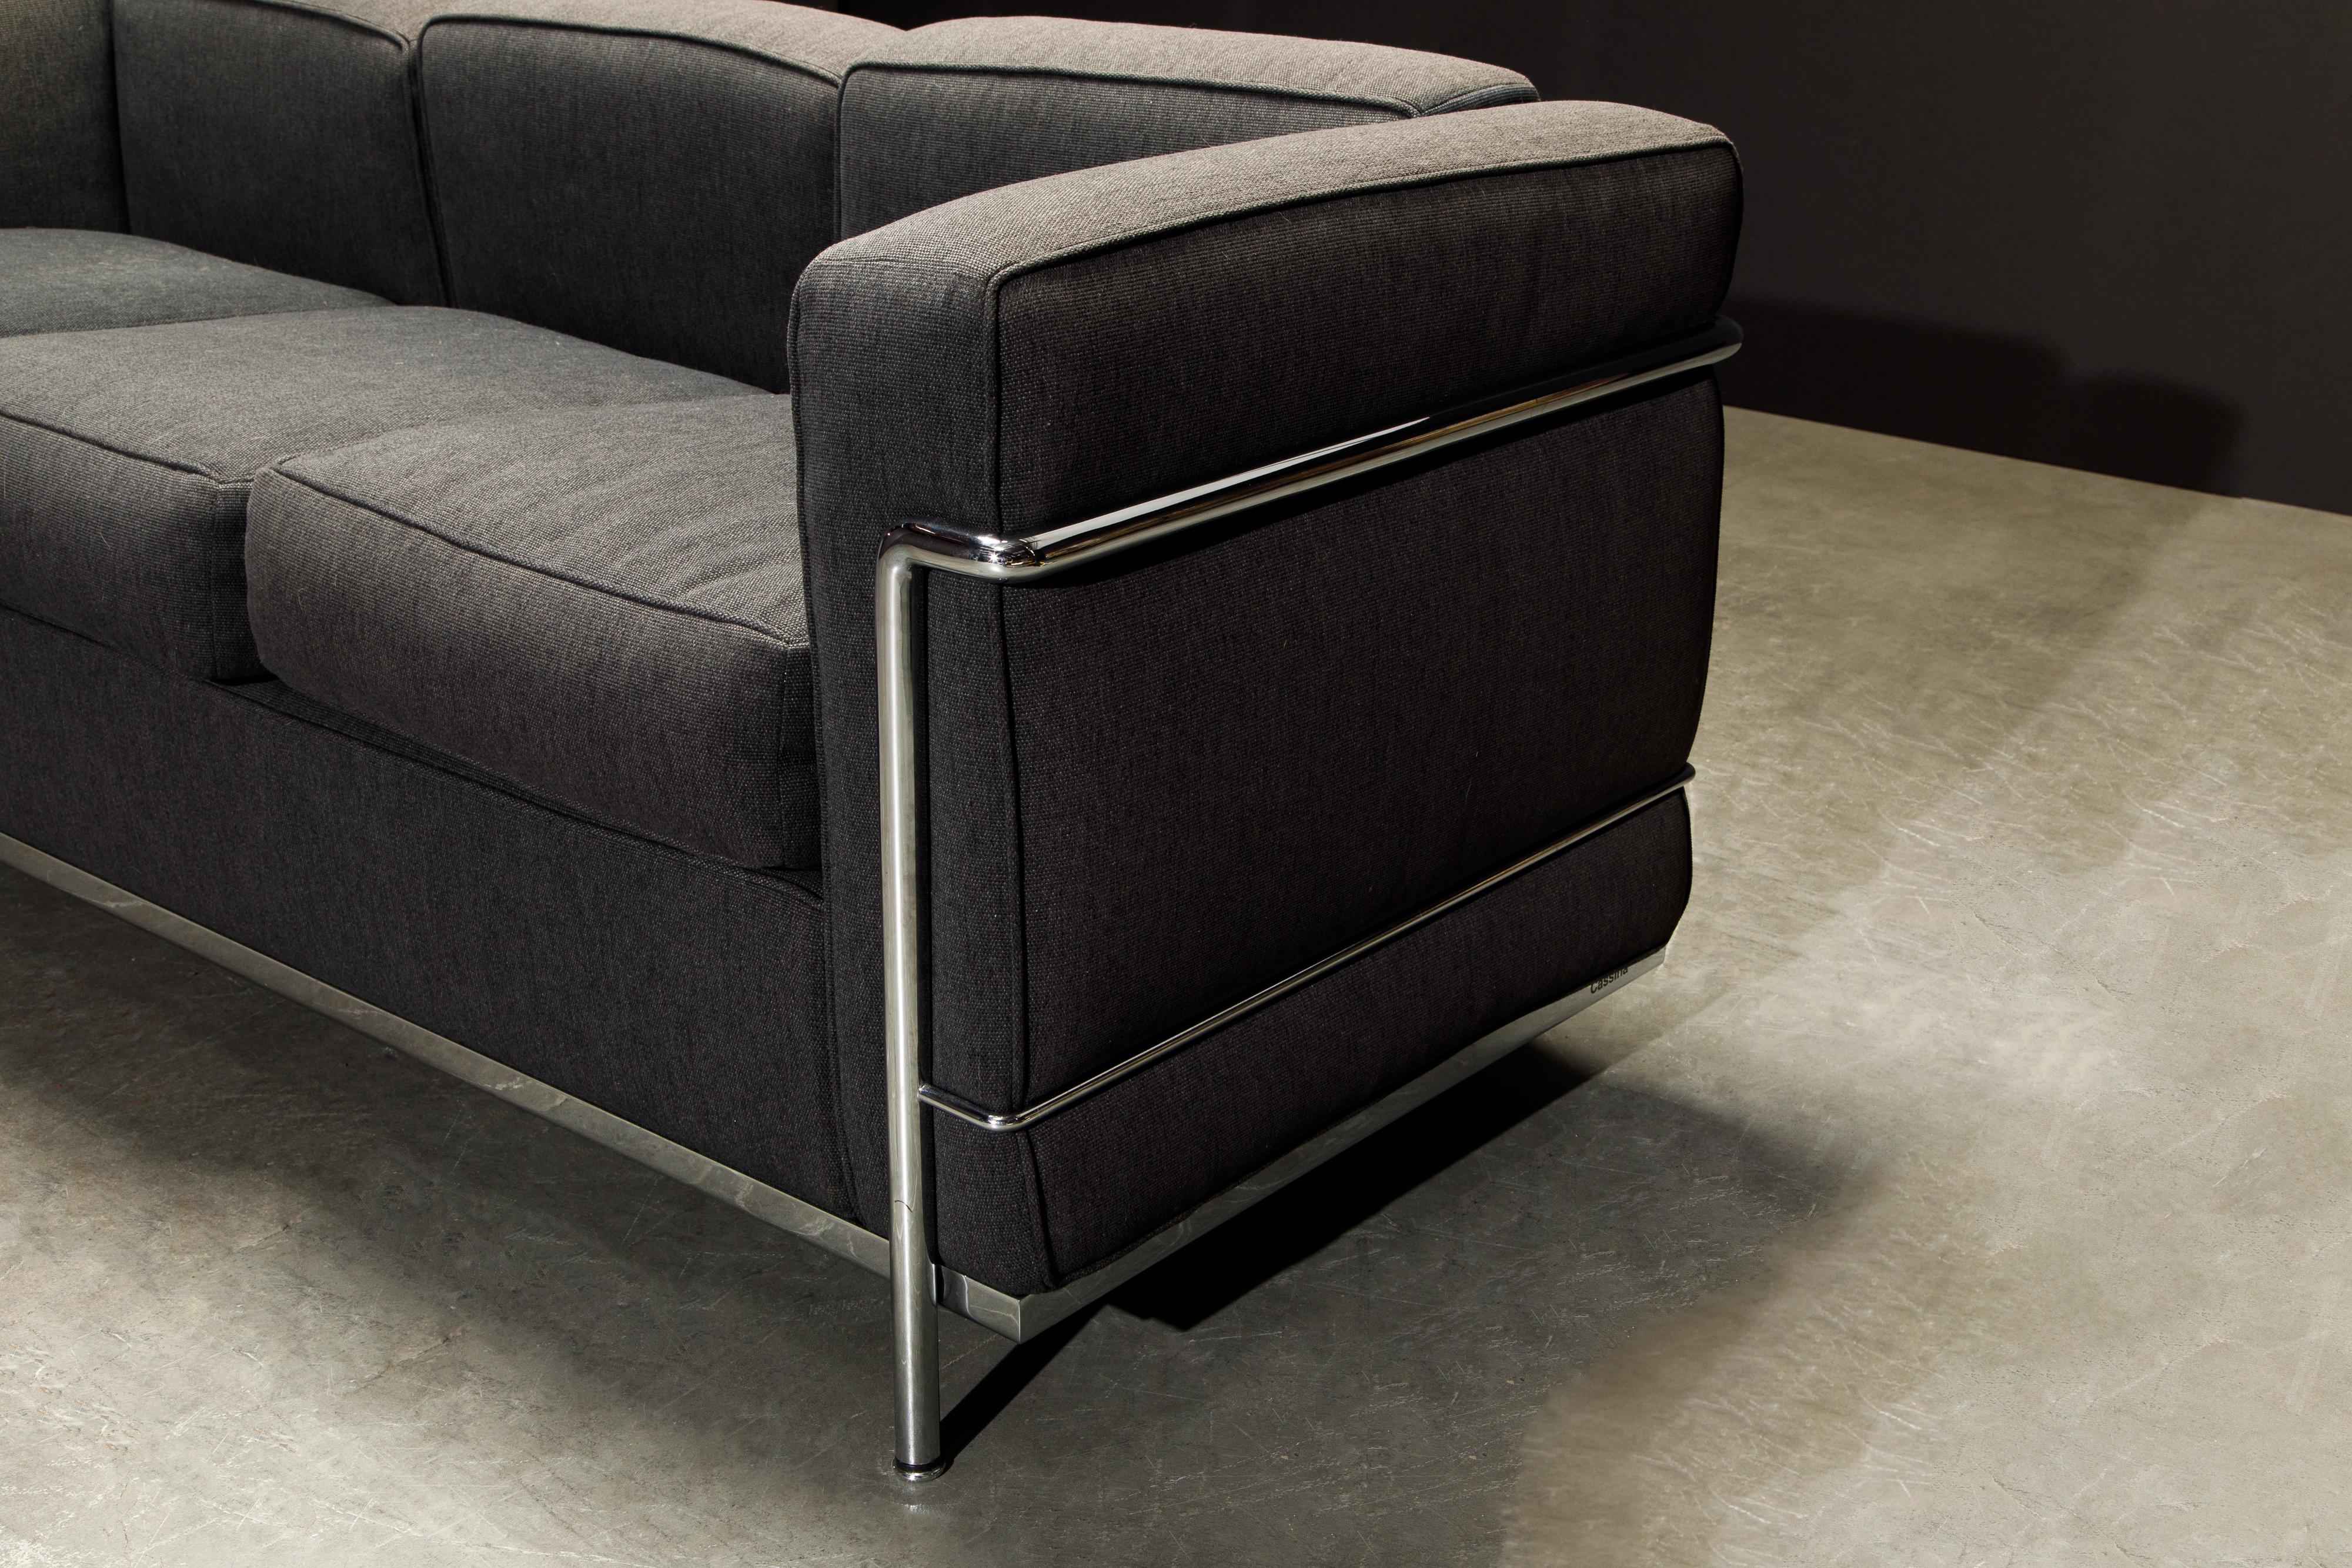 Contemporary 'LC2' Three-Seat Sofa by Le Corbusier, Jeanneret & Perriand for Cassina, Signed